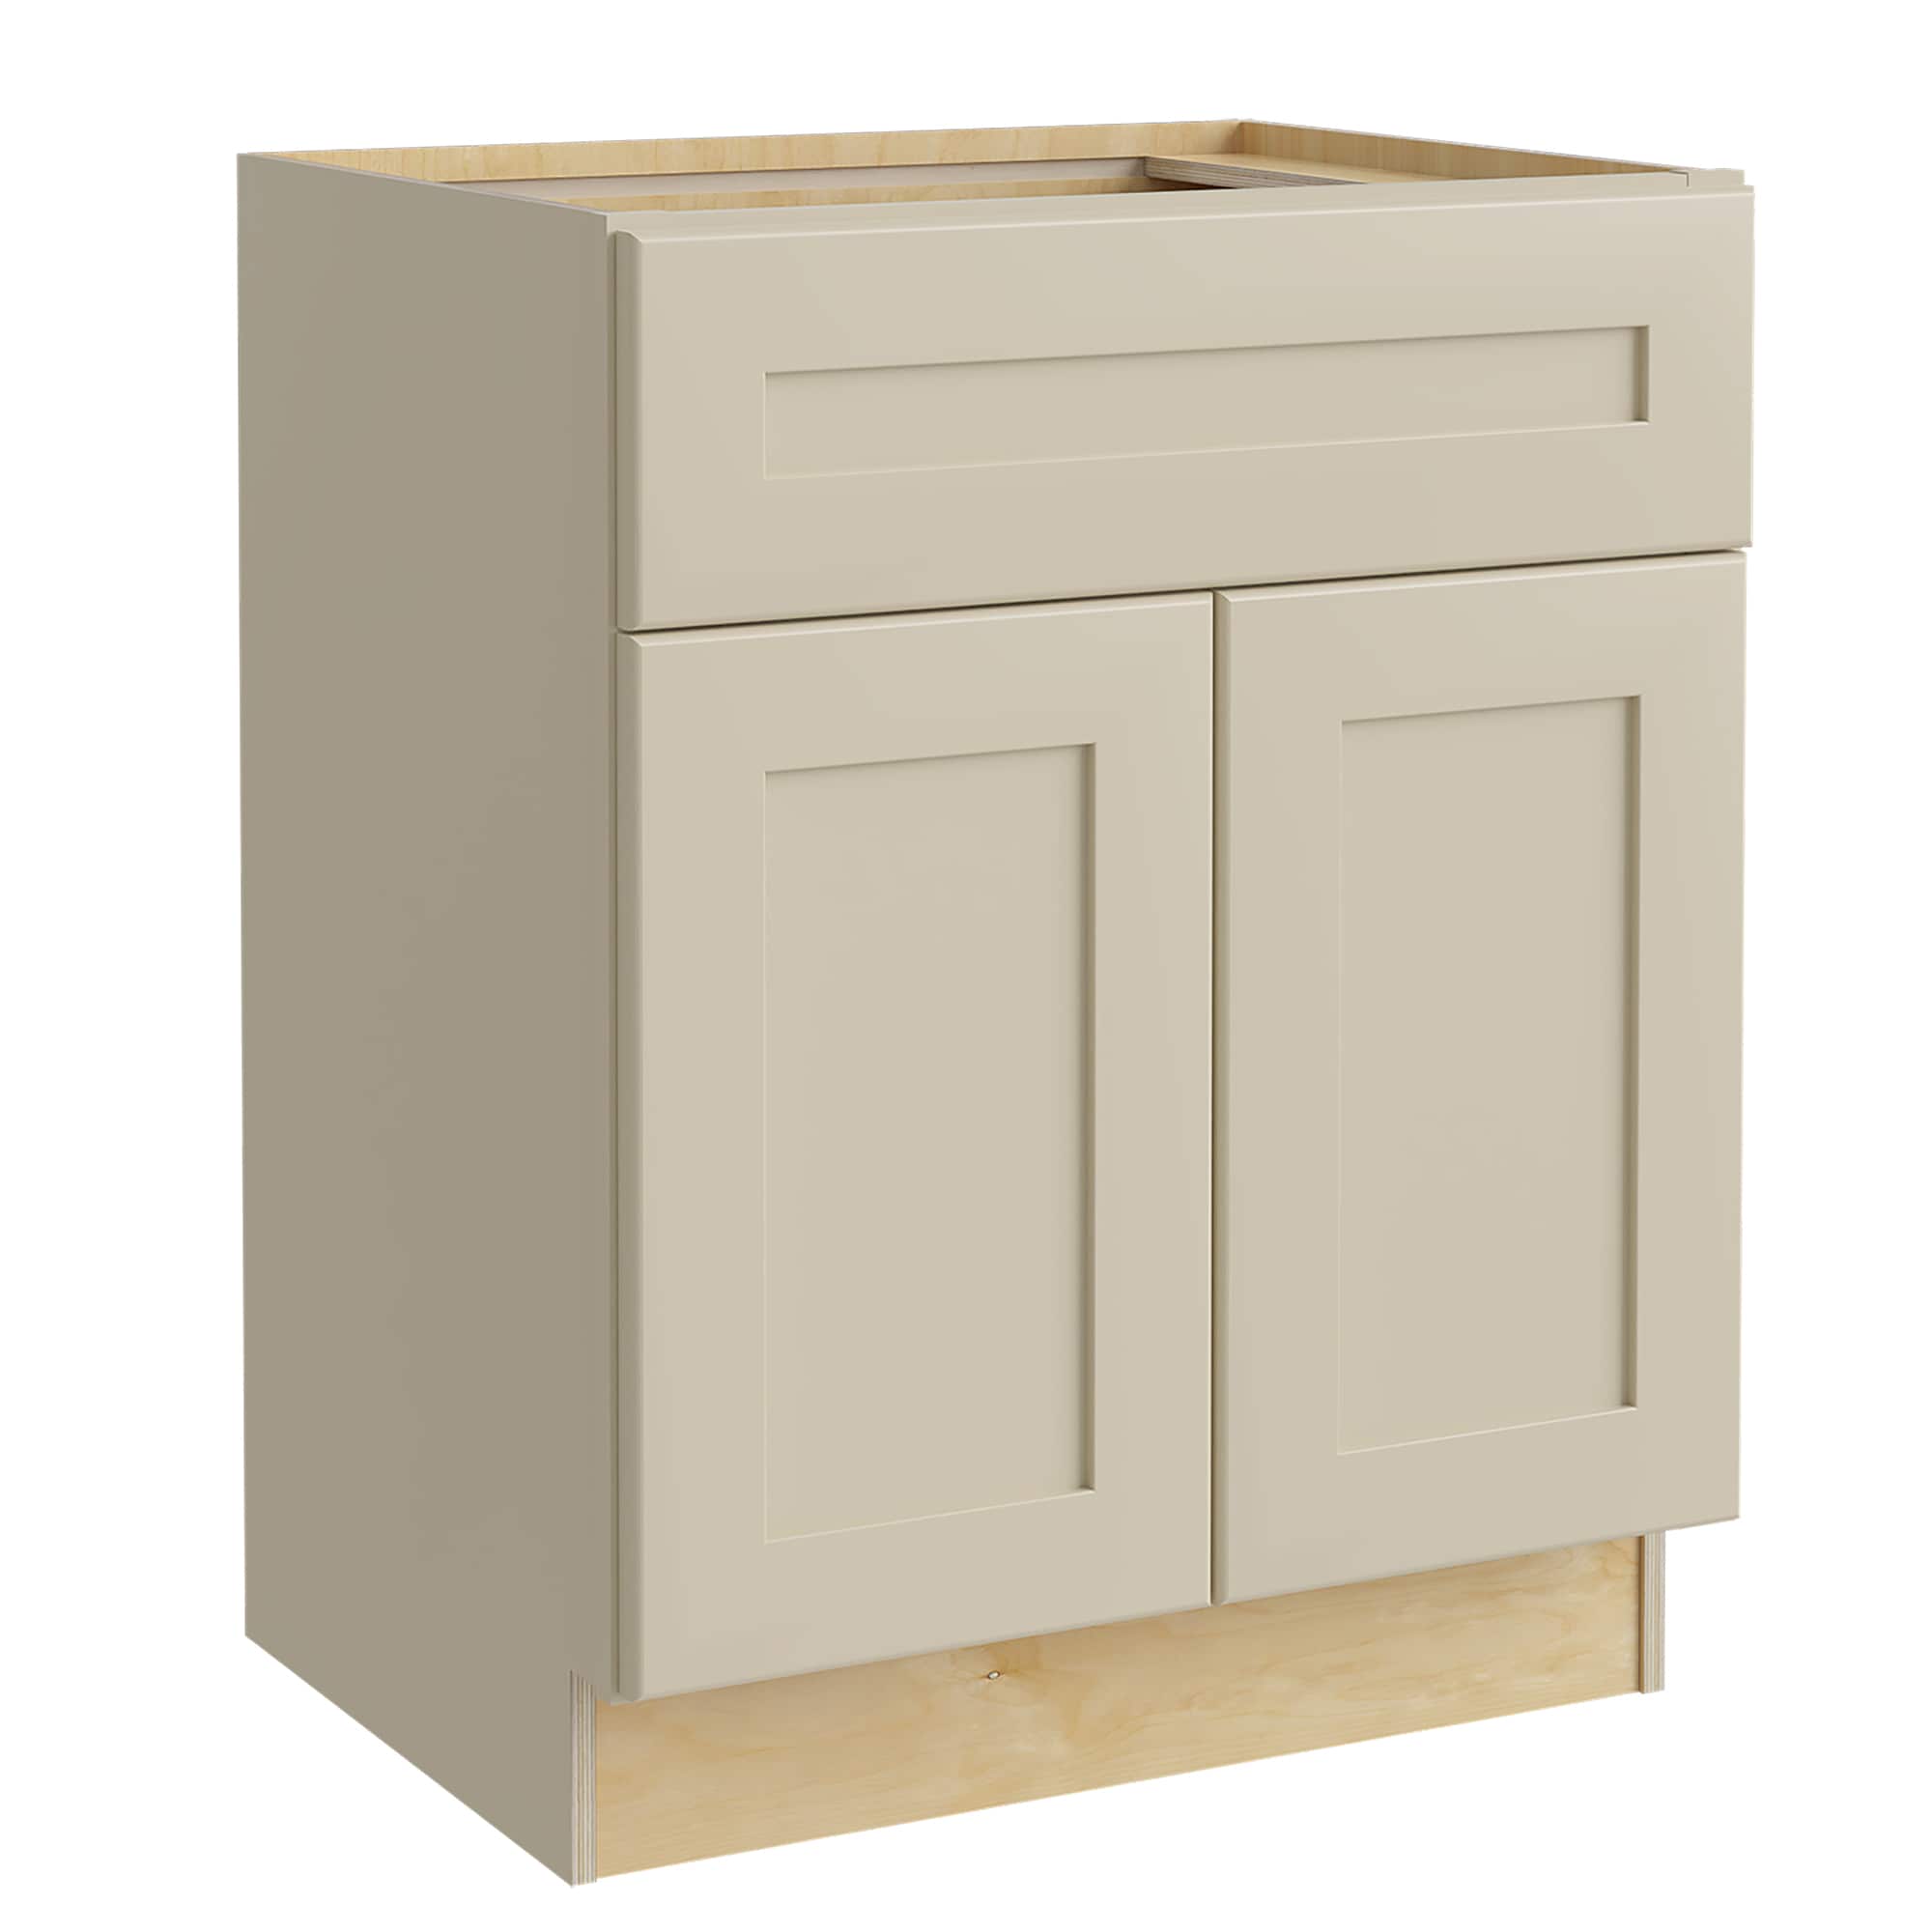 Luxxe Cabinetry 27-in W x 34.5-in H x 24-in D Norfolk Blended Cream Painted Sink Base Fully Assembled Semi-custom Cabinet in Off-White | SB27-NBC